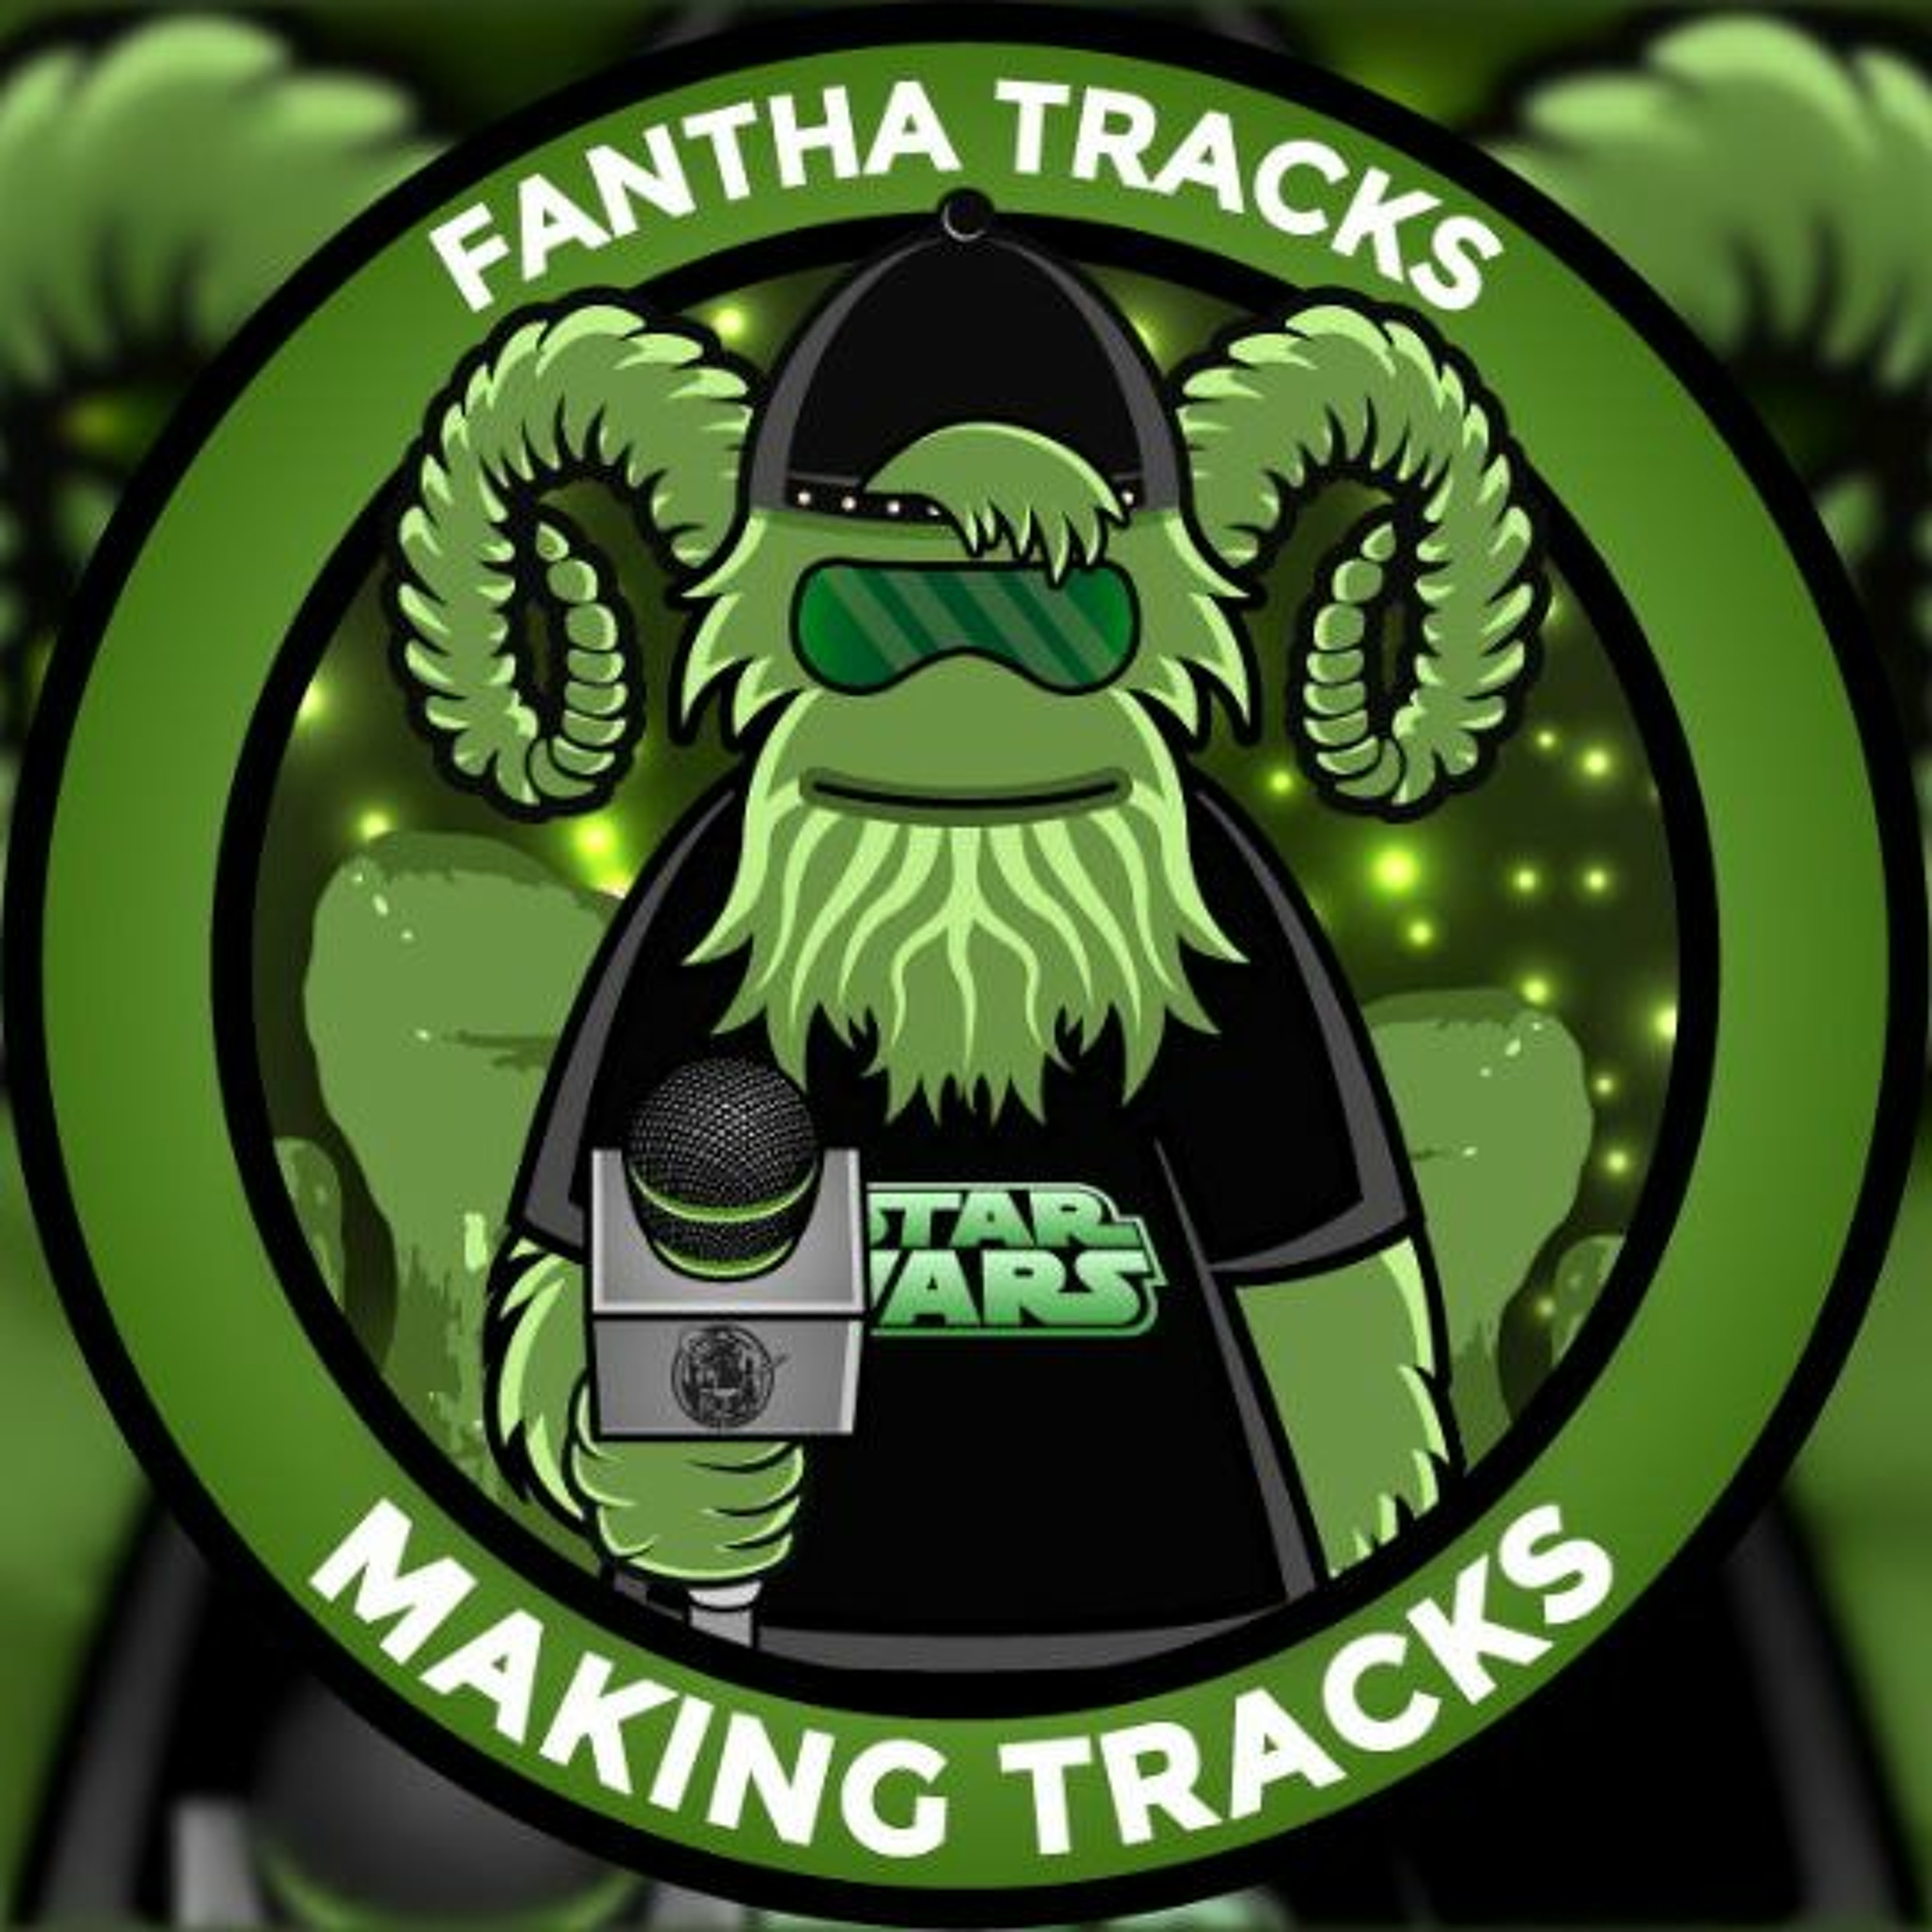 Making Tracks Episode 148: Squeeze some troops in